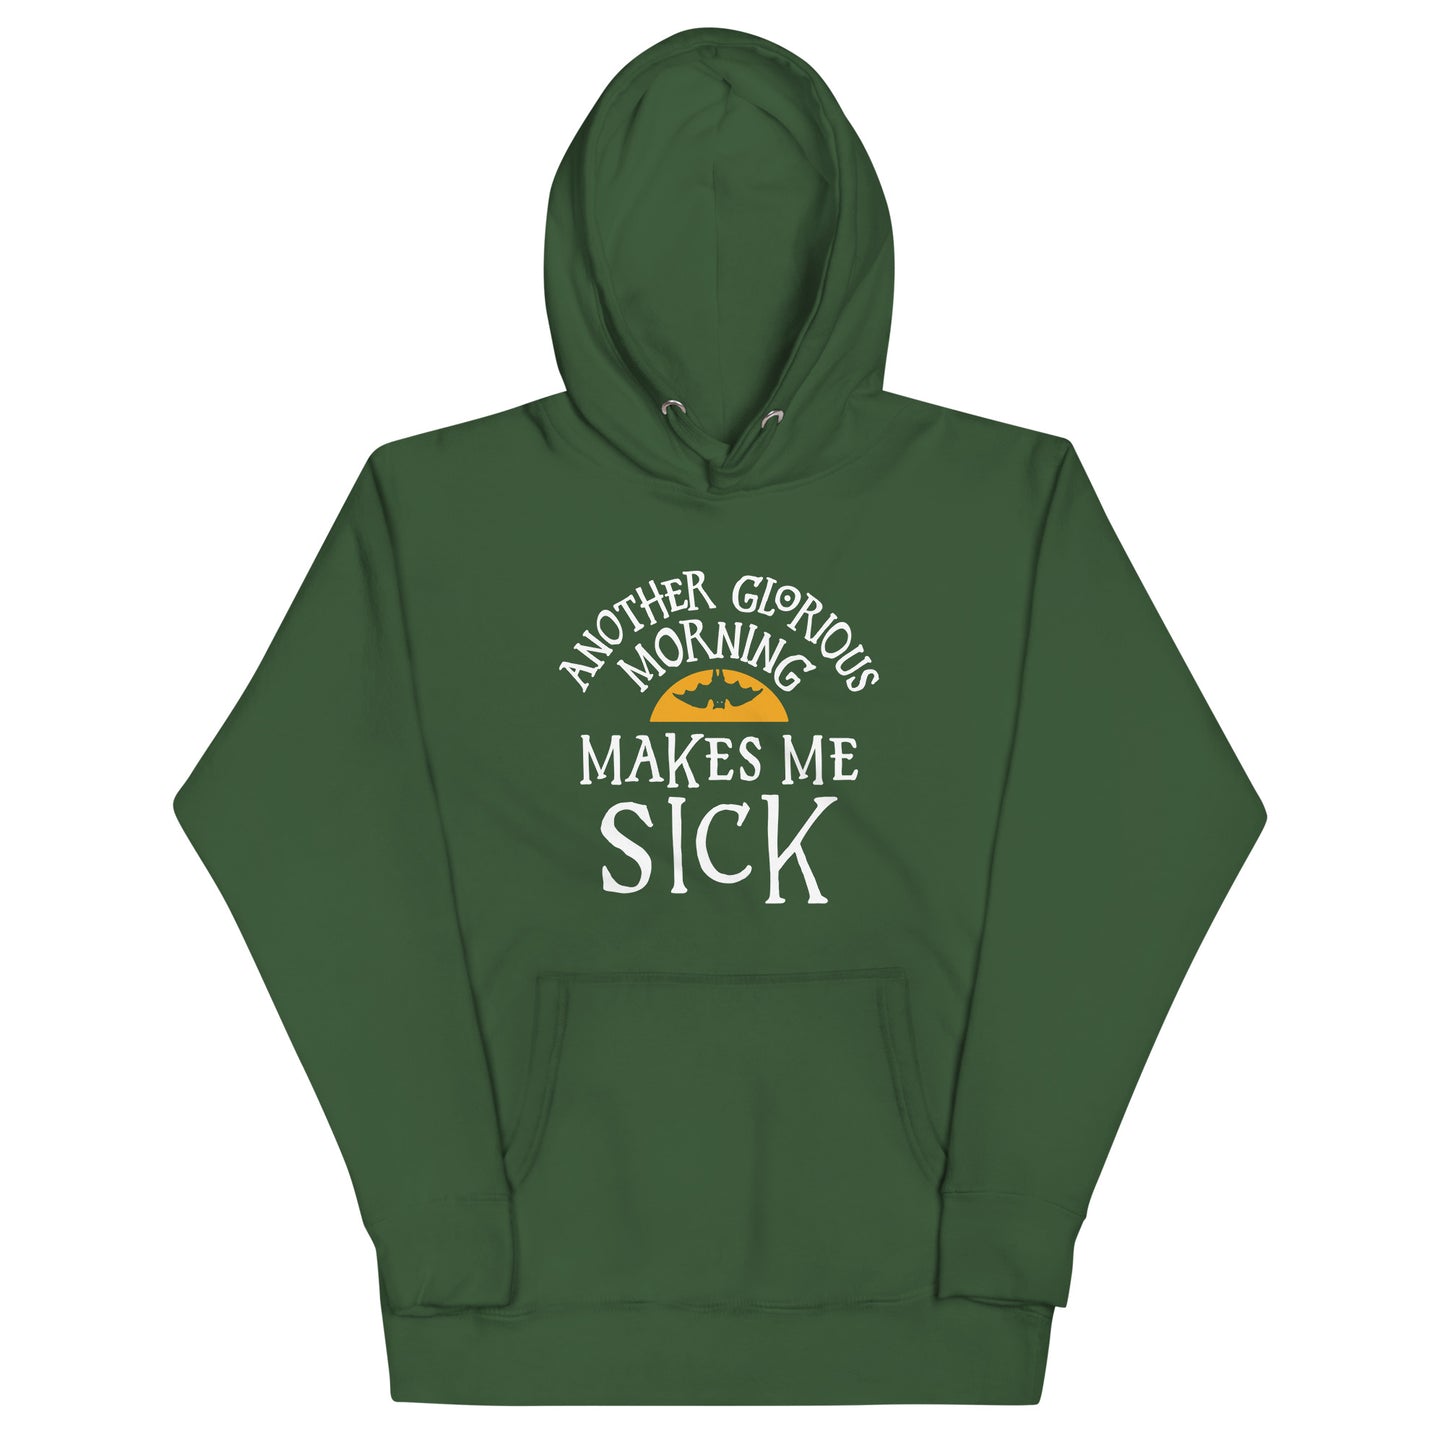 Another Glorious Morning Unisex Hoodie